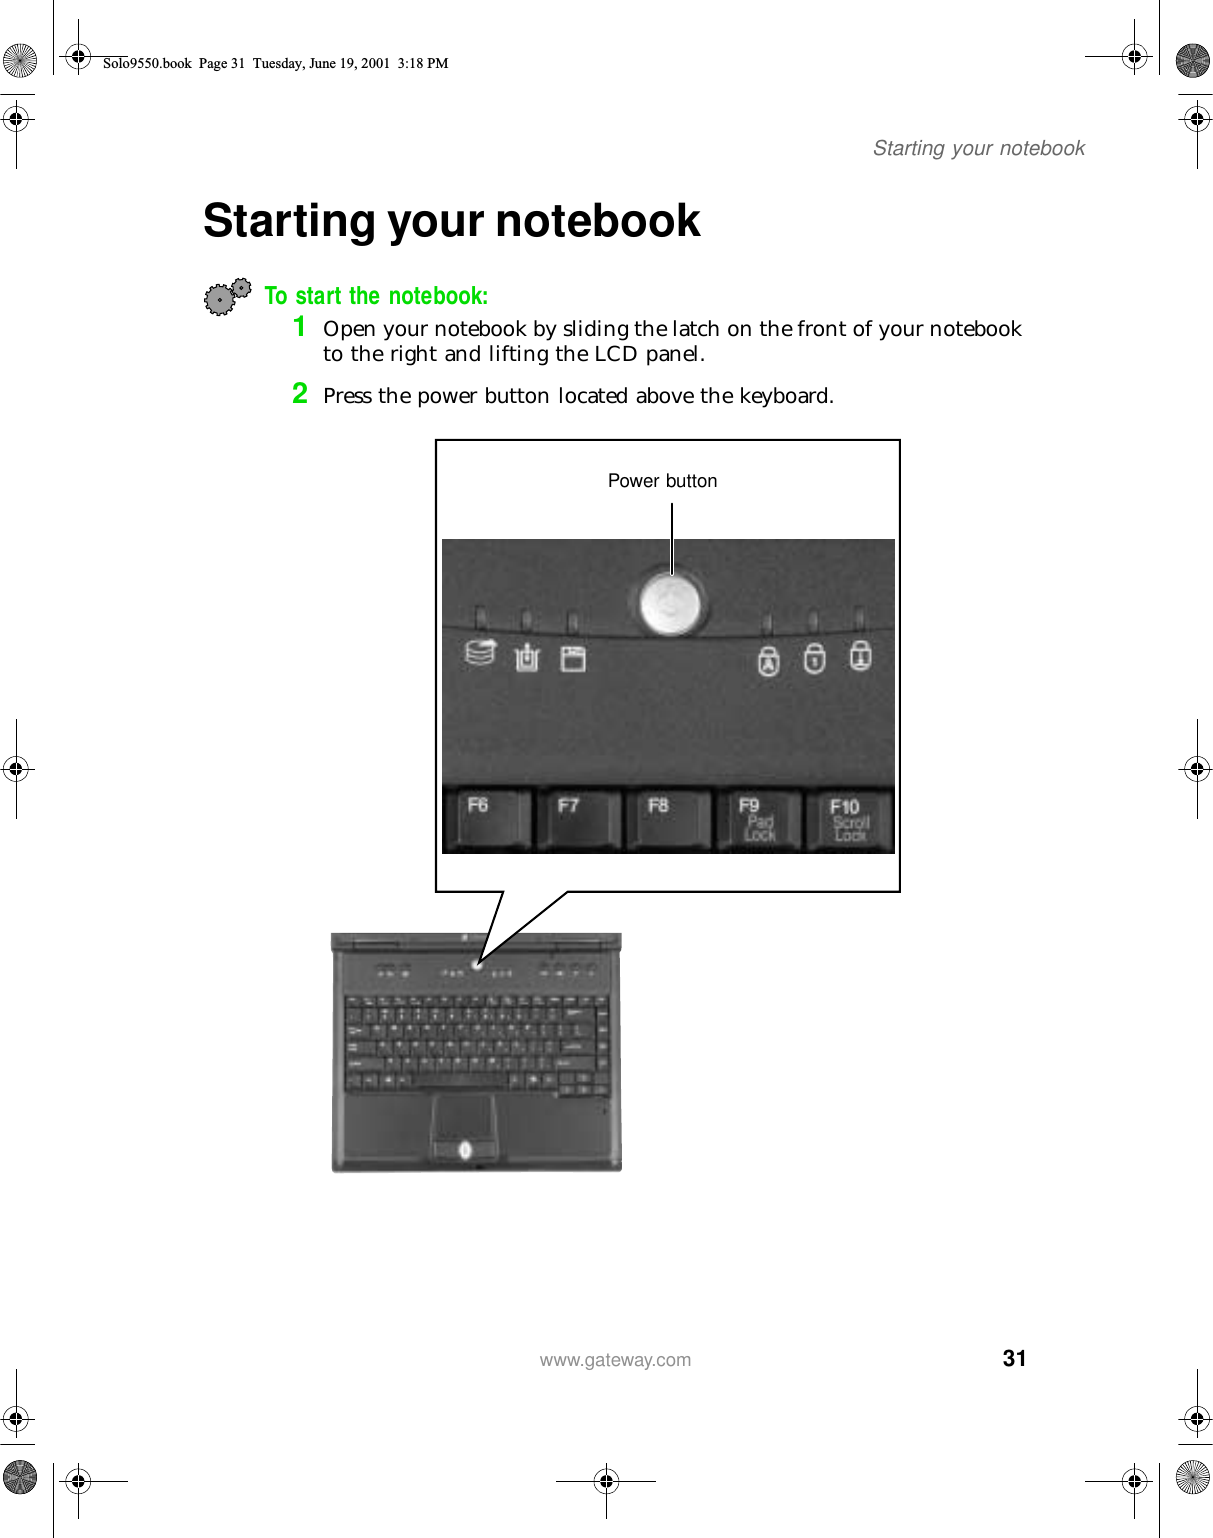 31Starting your notebookwww.gateway.comStarting your notebookTo start the notebook:1Open your notebook by sliding the latch on the front of your notebook to the right and lifting the LCD panel.2Press the power button located above the keyboard.Power buttonSolo9550.book Page 31 Tuesday, June 19, 2001 3:18 PM